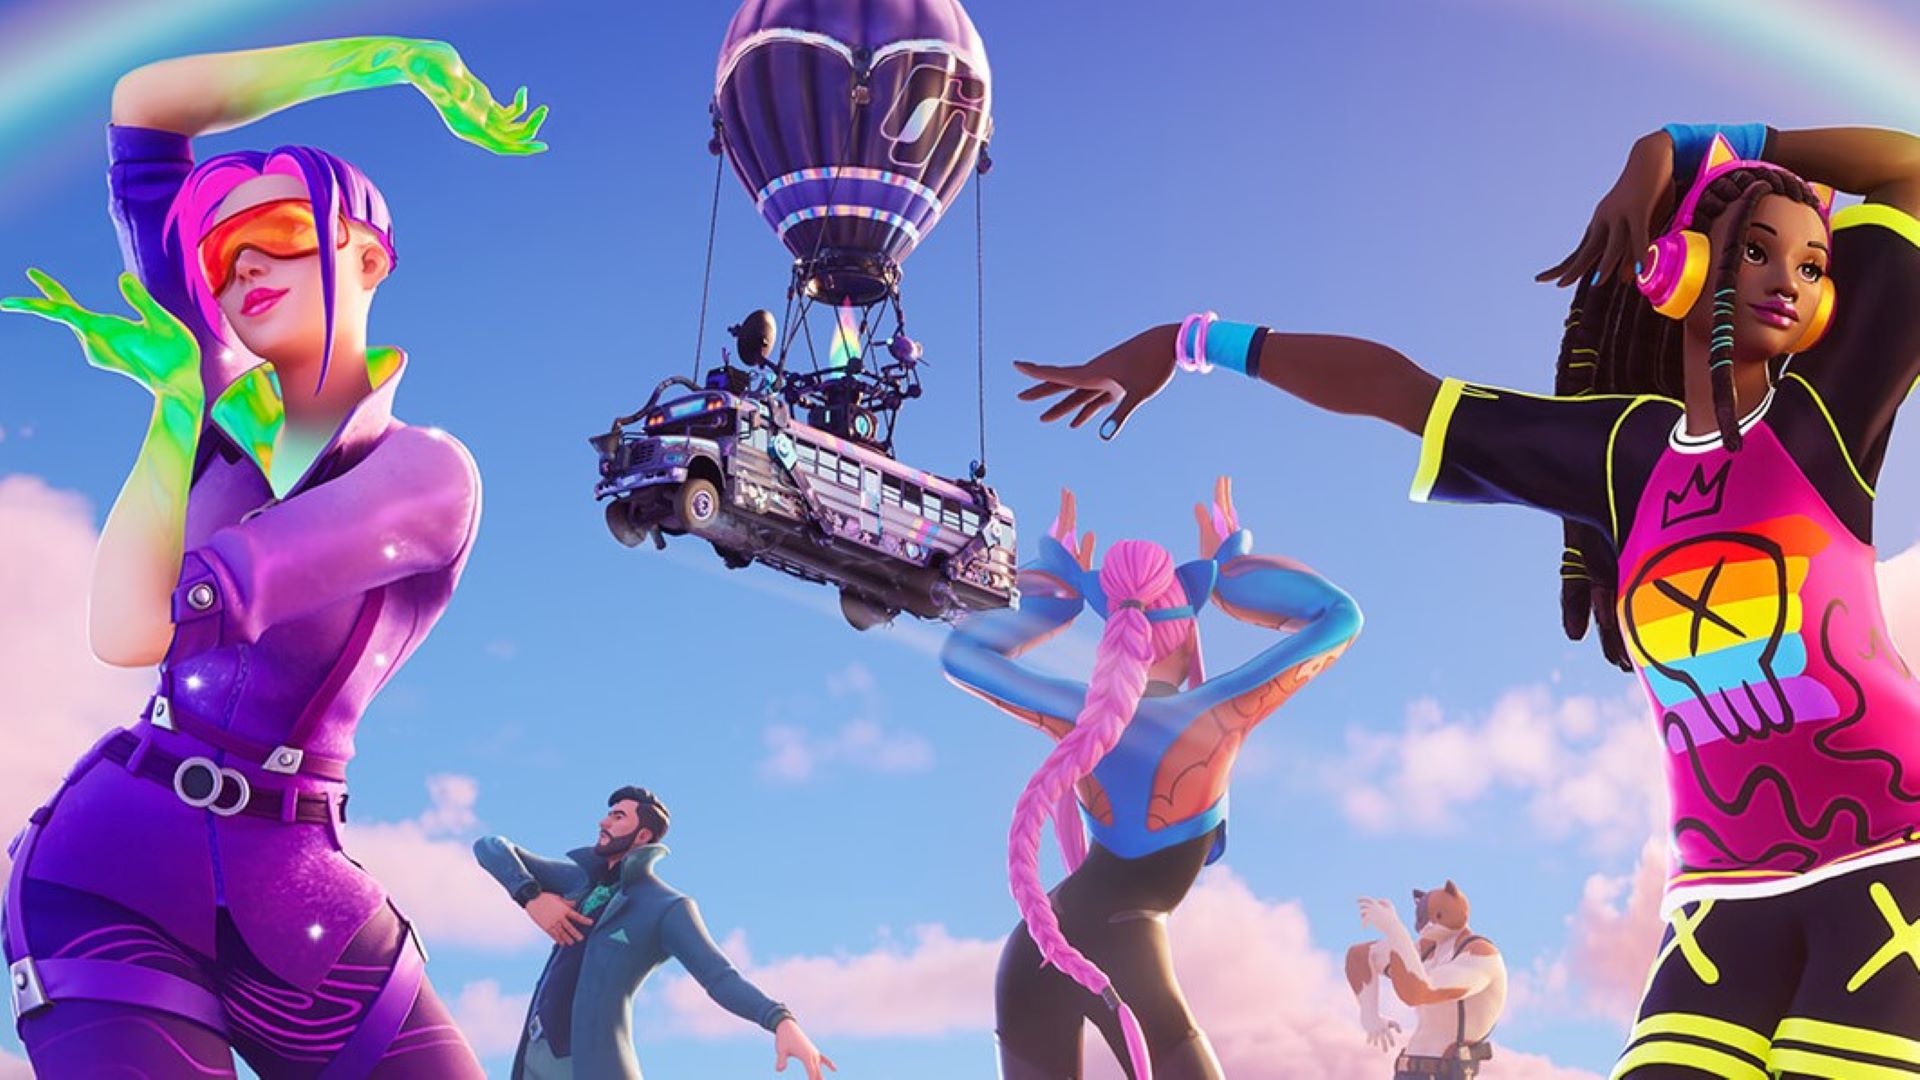 Fortnite’s fifth birthday celebrations are coming